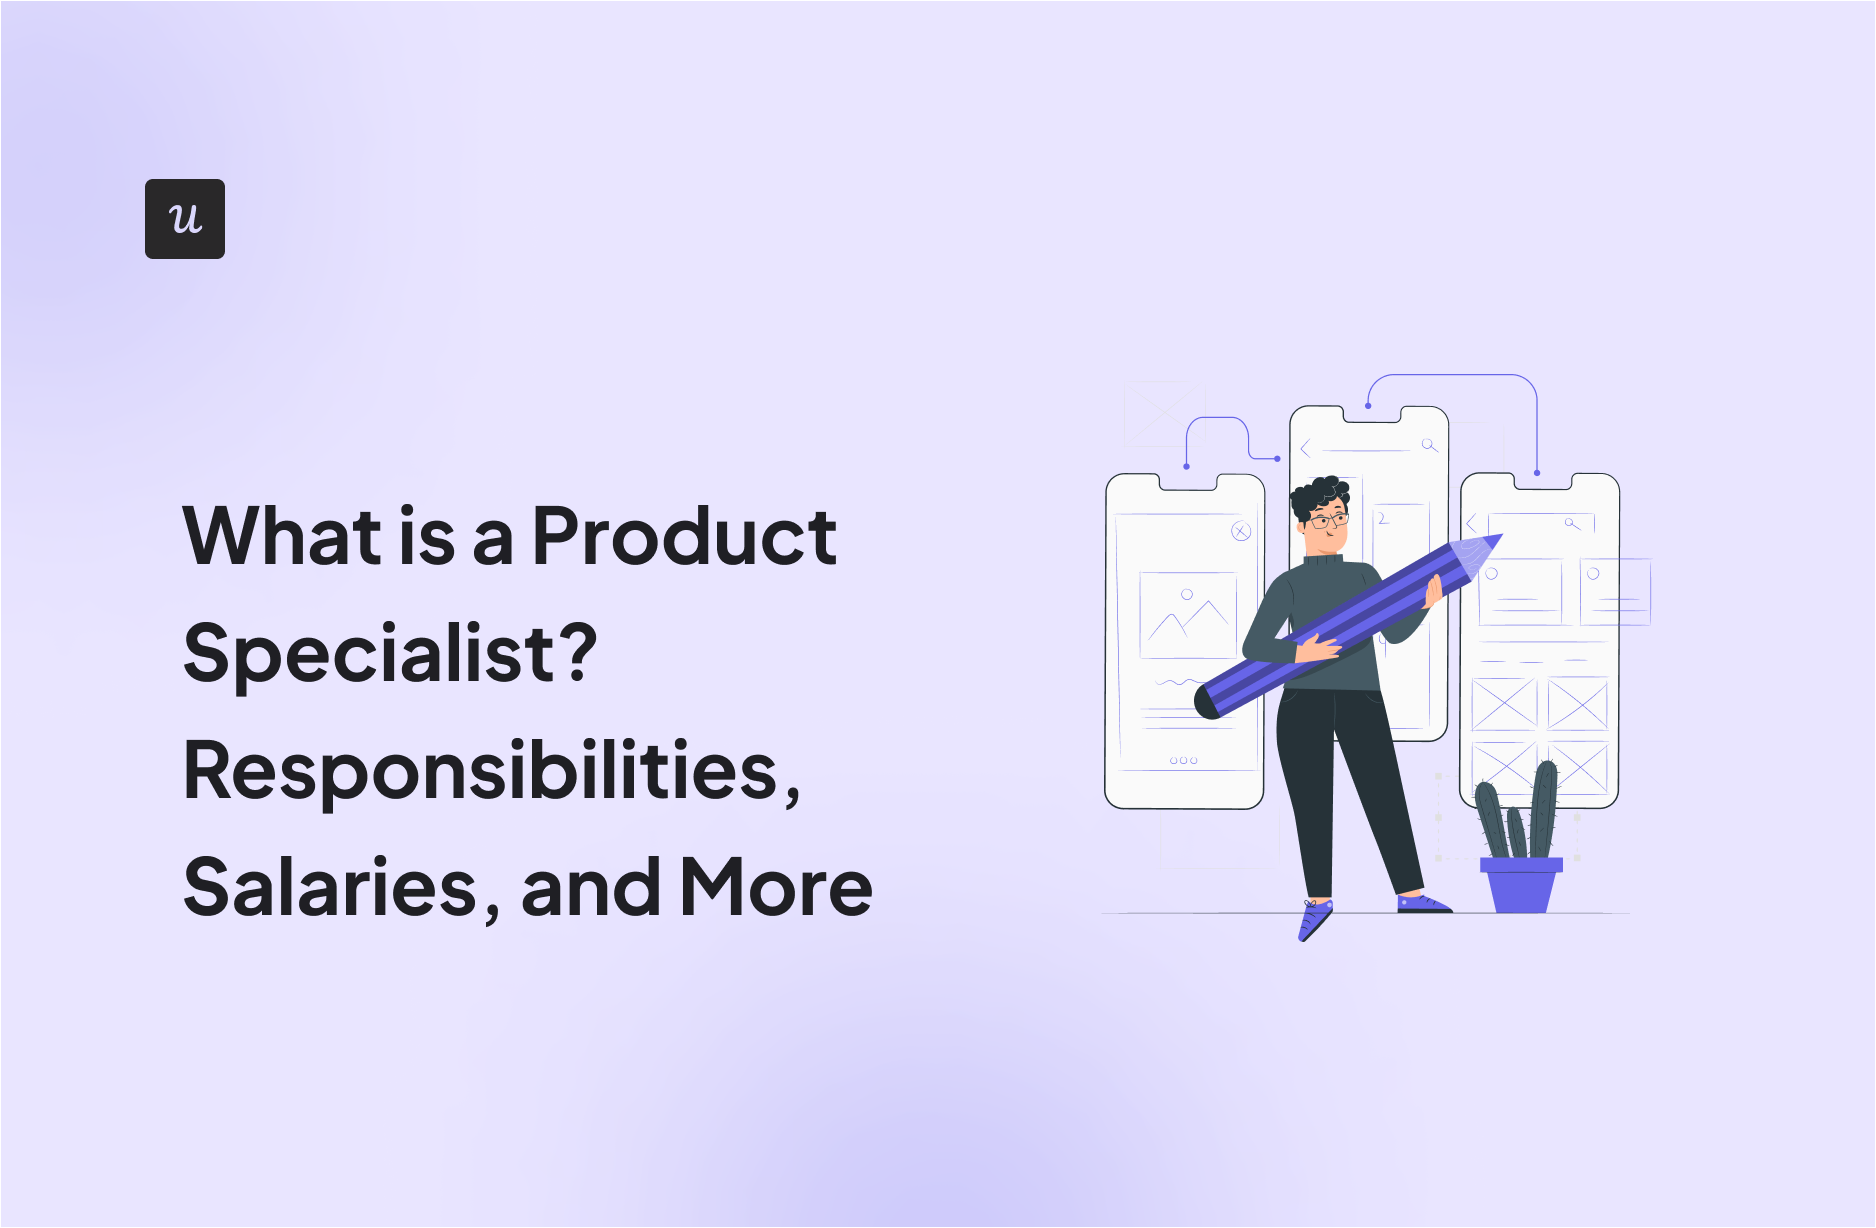 What is a Product Specialist? Responsibilities, Salaries, and More